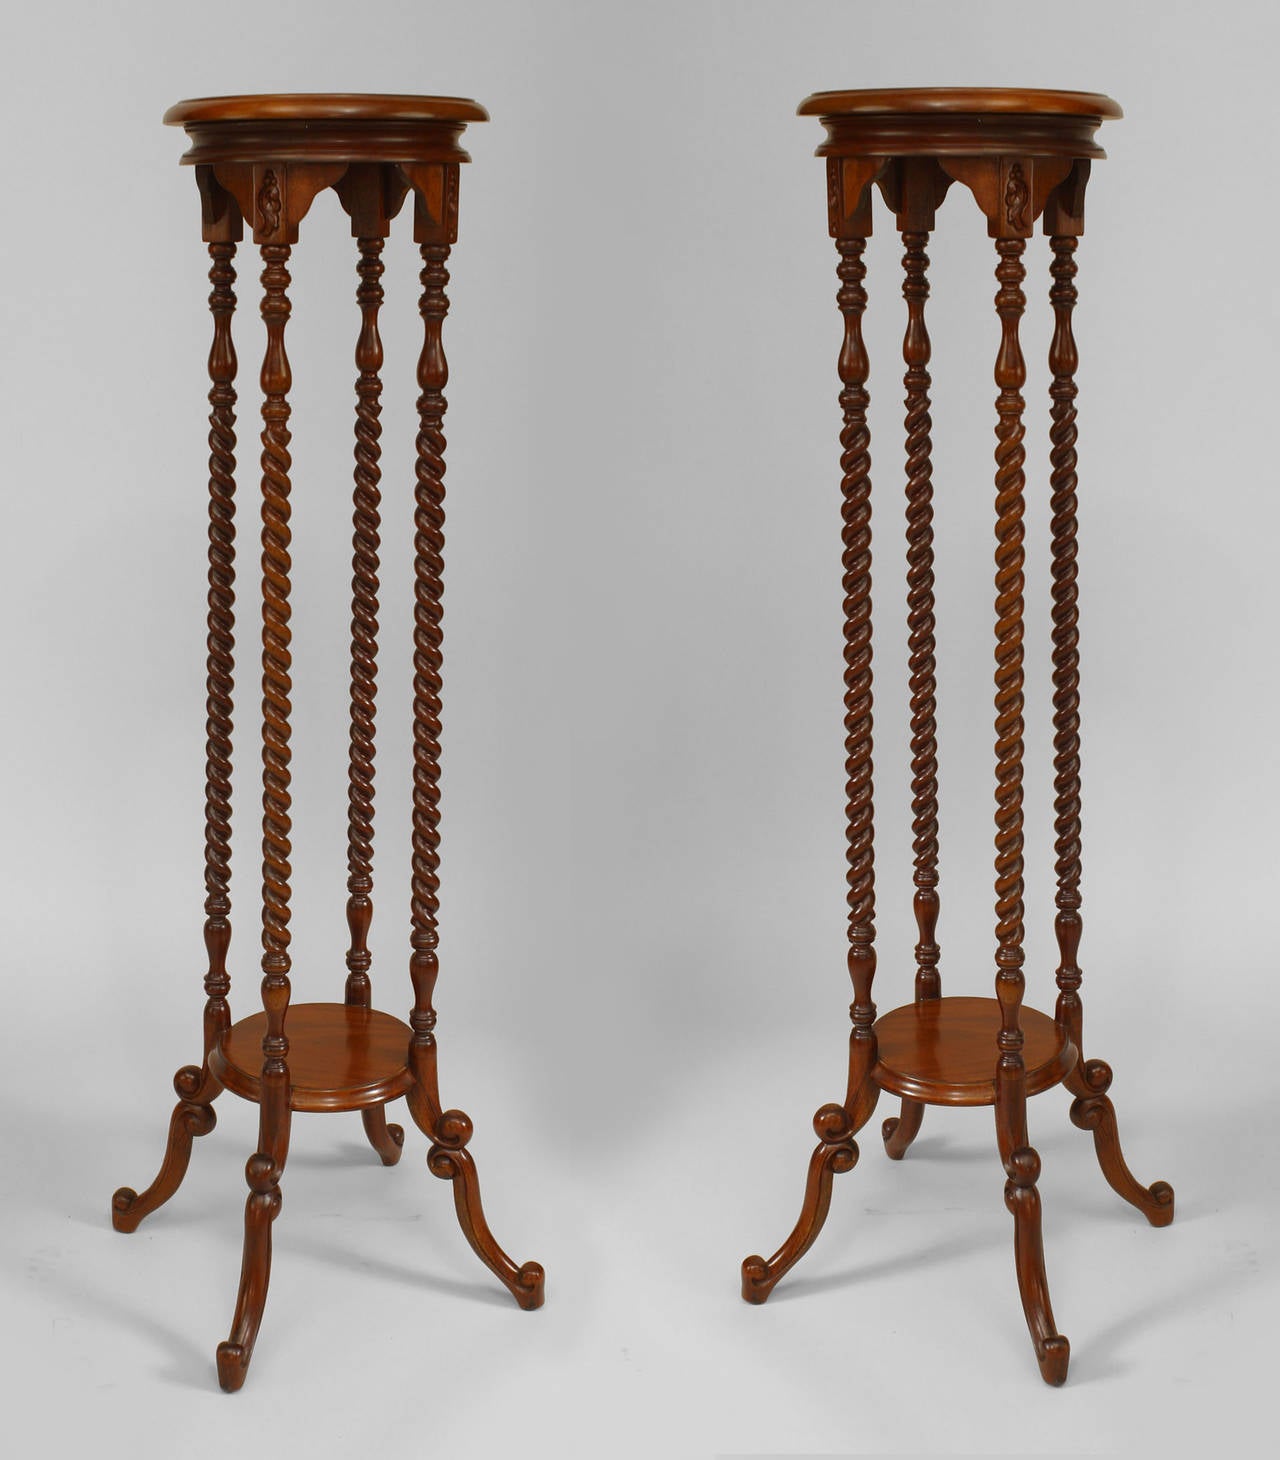 Pair of English pedestals with four swirl design columns and a bottom shelf.